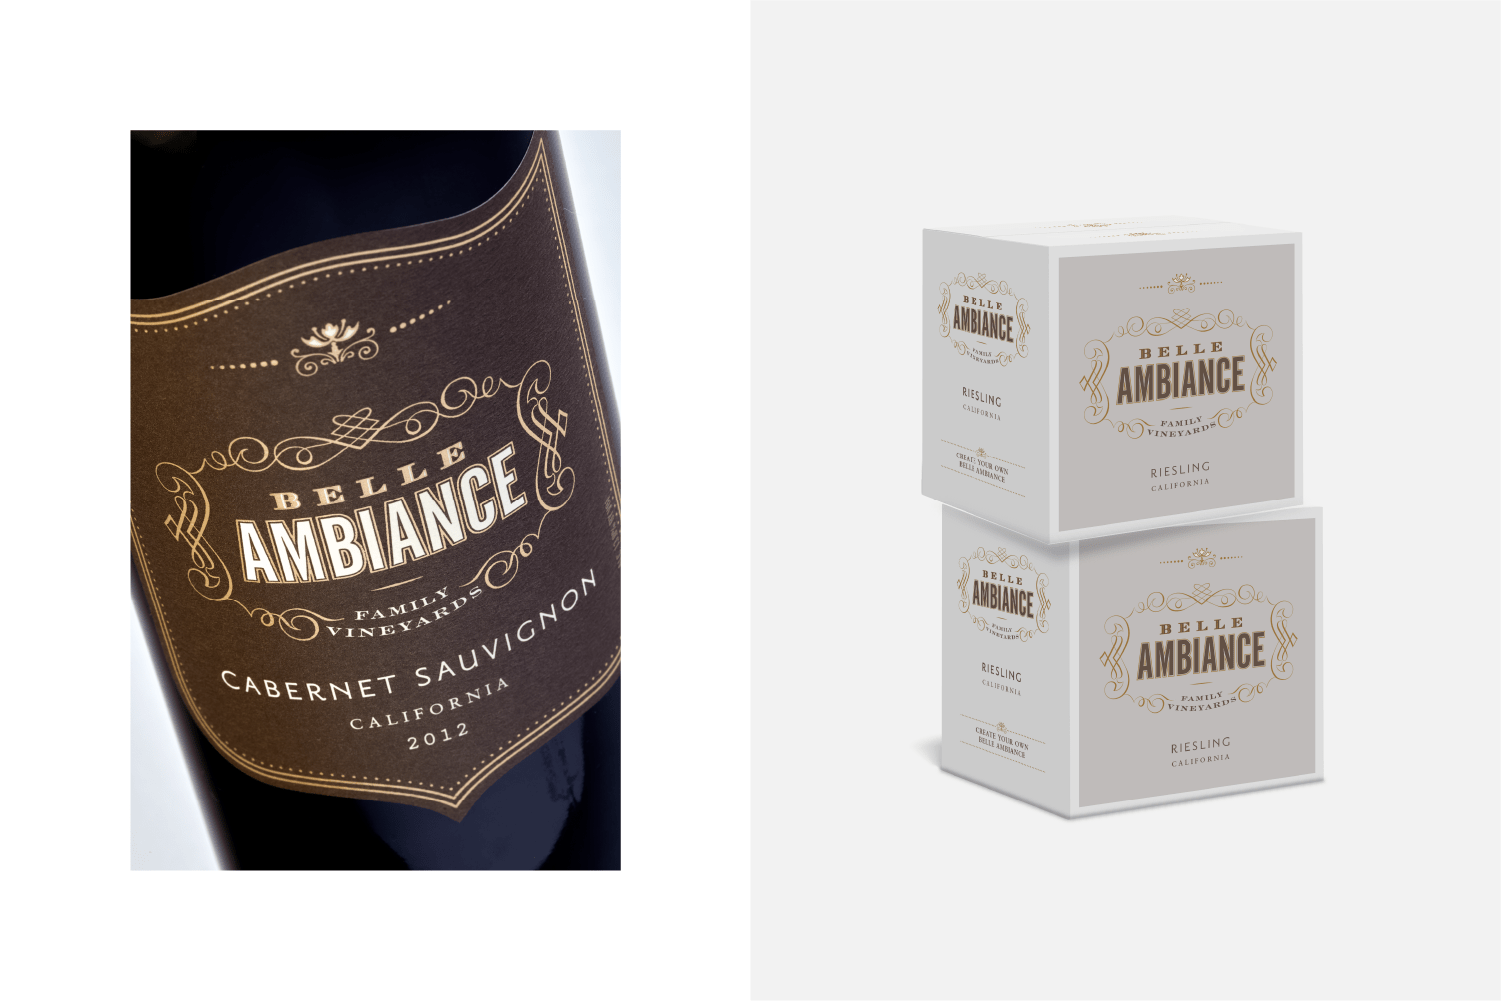 Belle Ambiance Cabernet Savignon and branded shipper cartons 